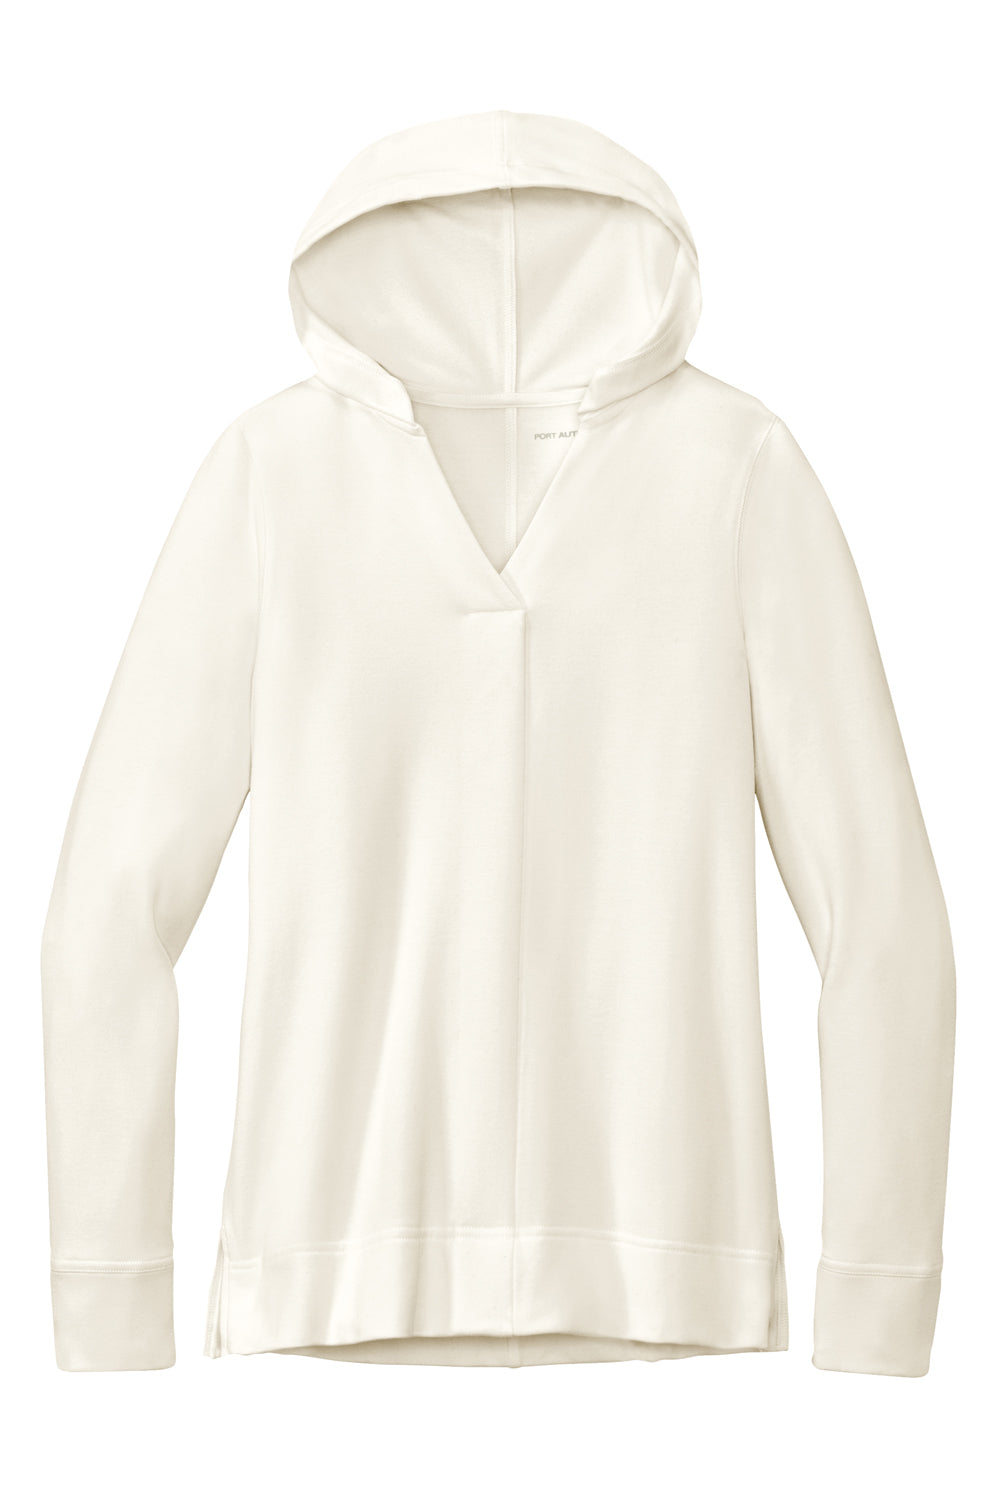 Port Authority LK826 Womens Microterry Hooded Sweatshirt Hoodie Ivory Chiffon White Flat Front